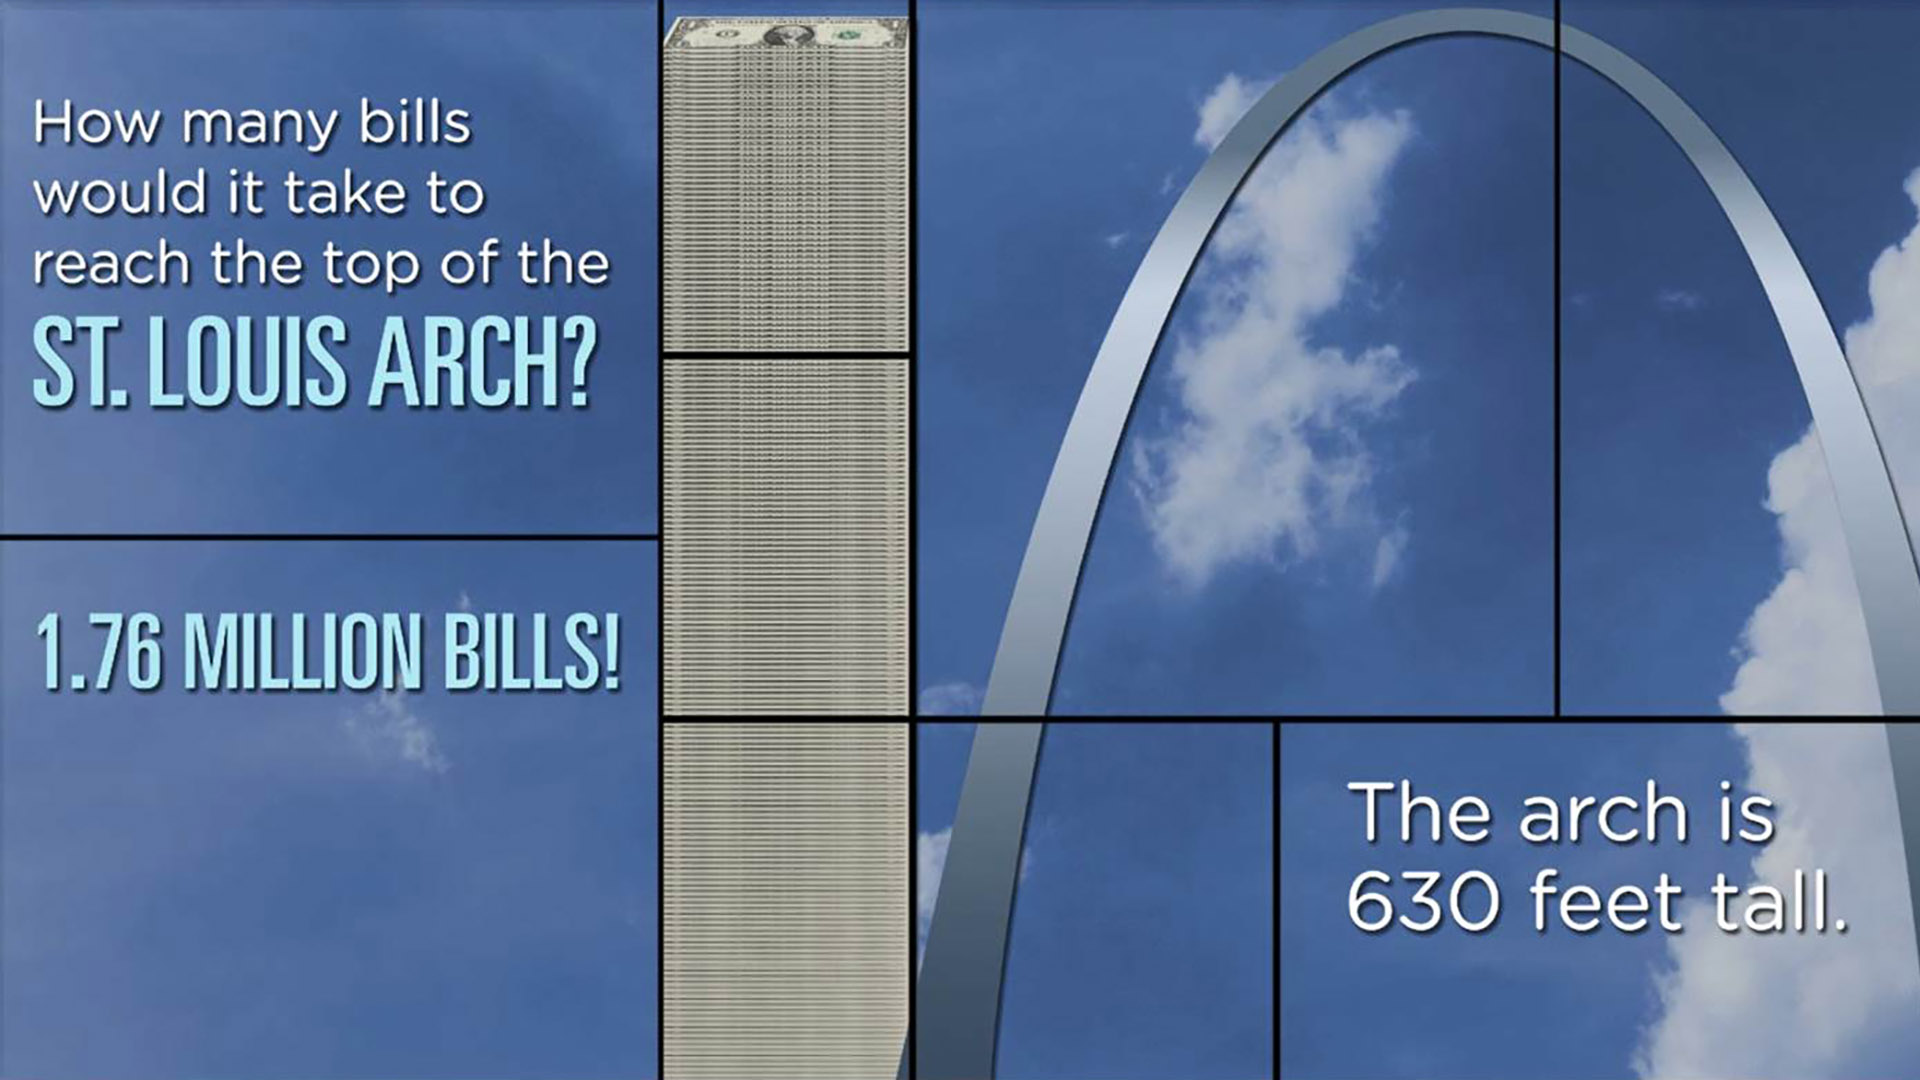 How many bills would it take to reach the top of the St. Louis Arch? 1.76 million bills. The arch is 630 feet tall. 